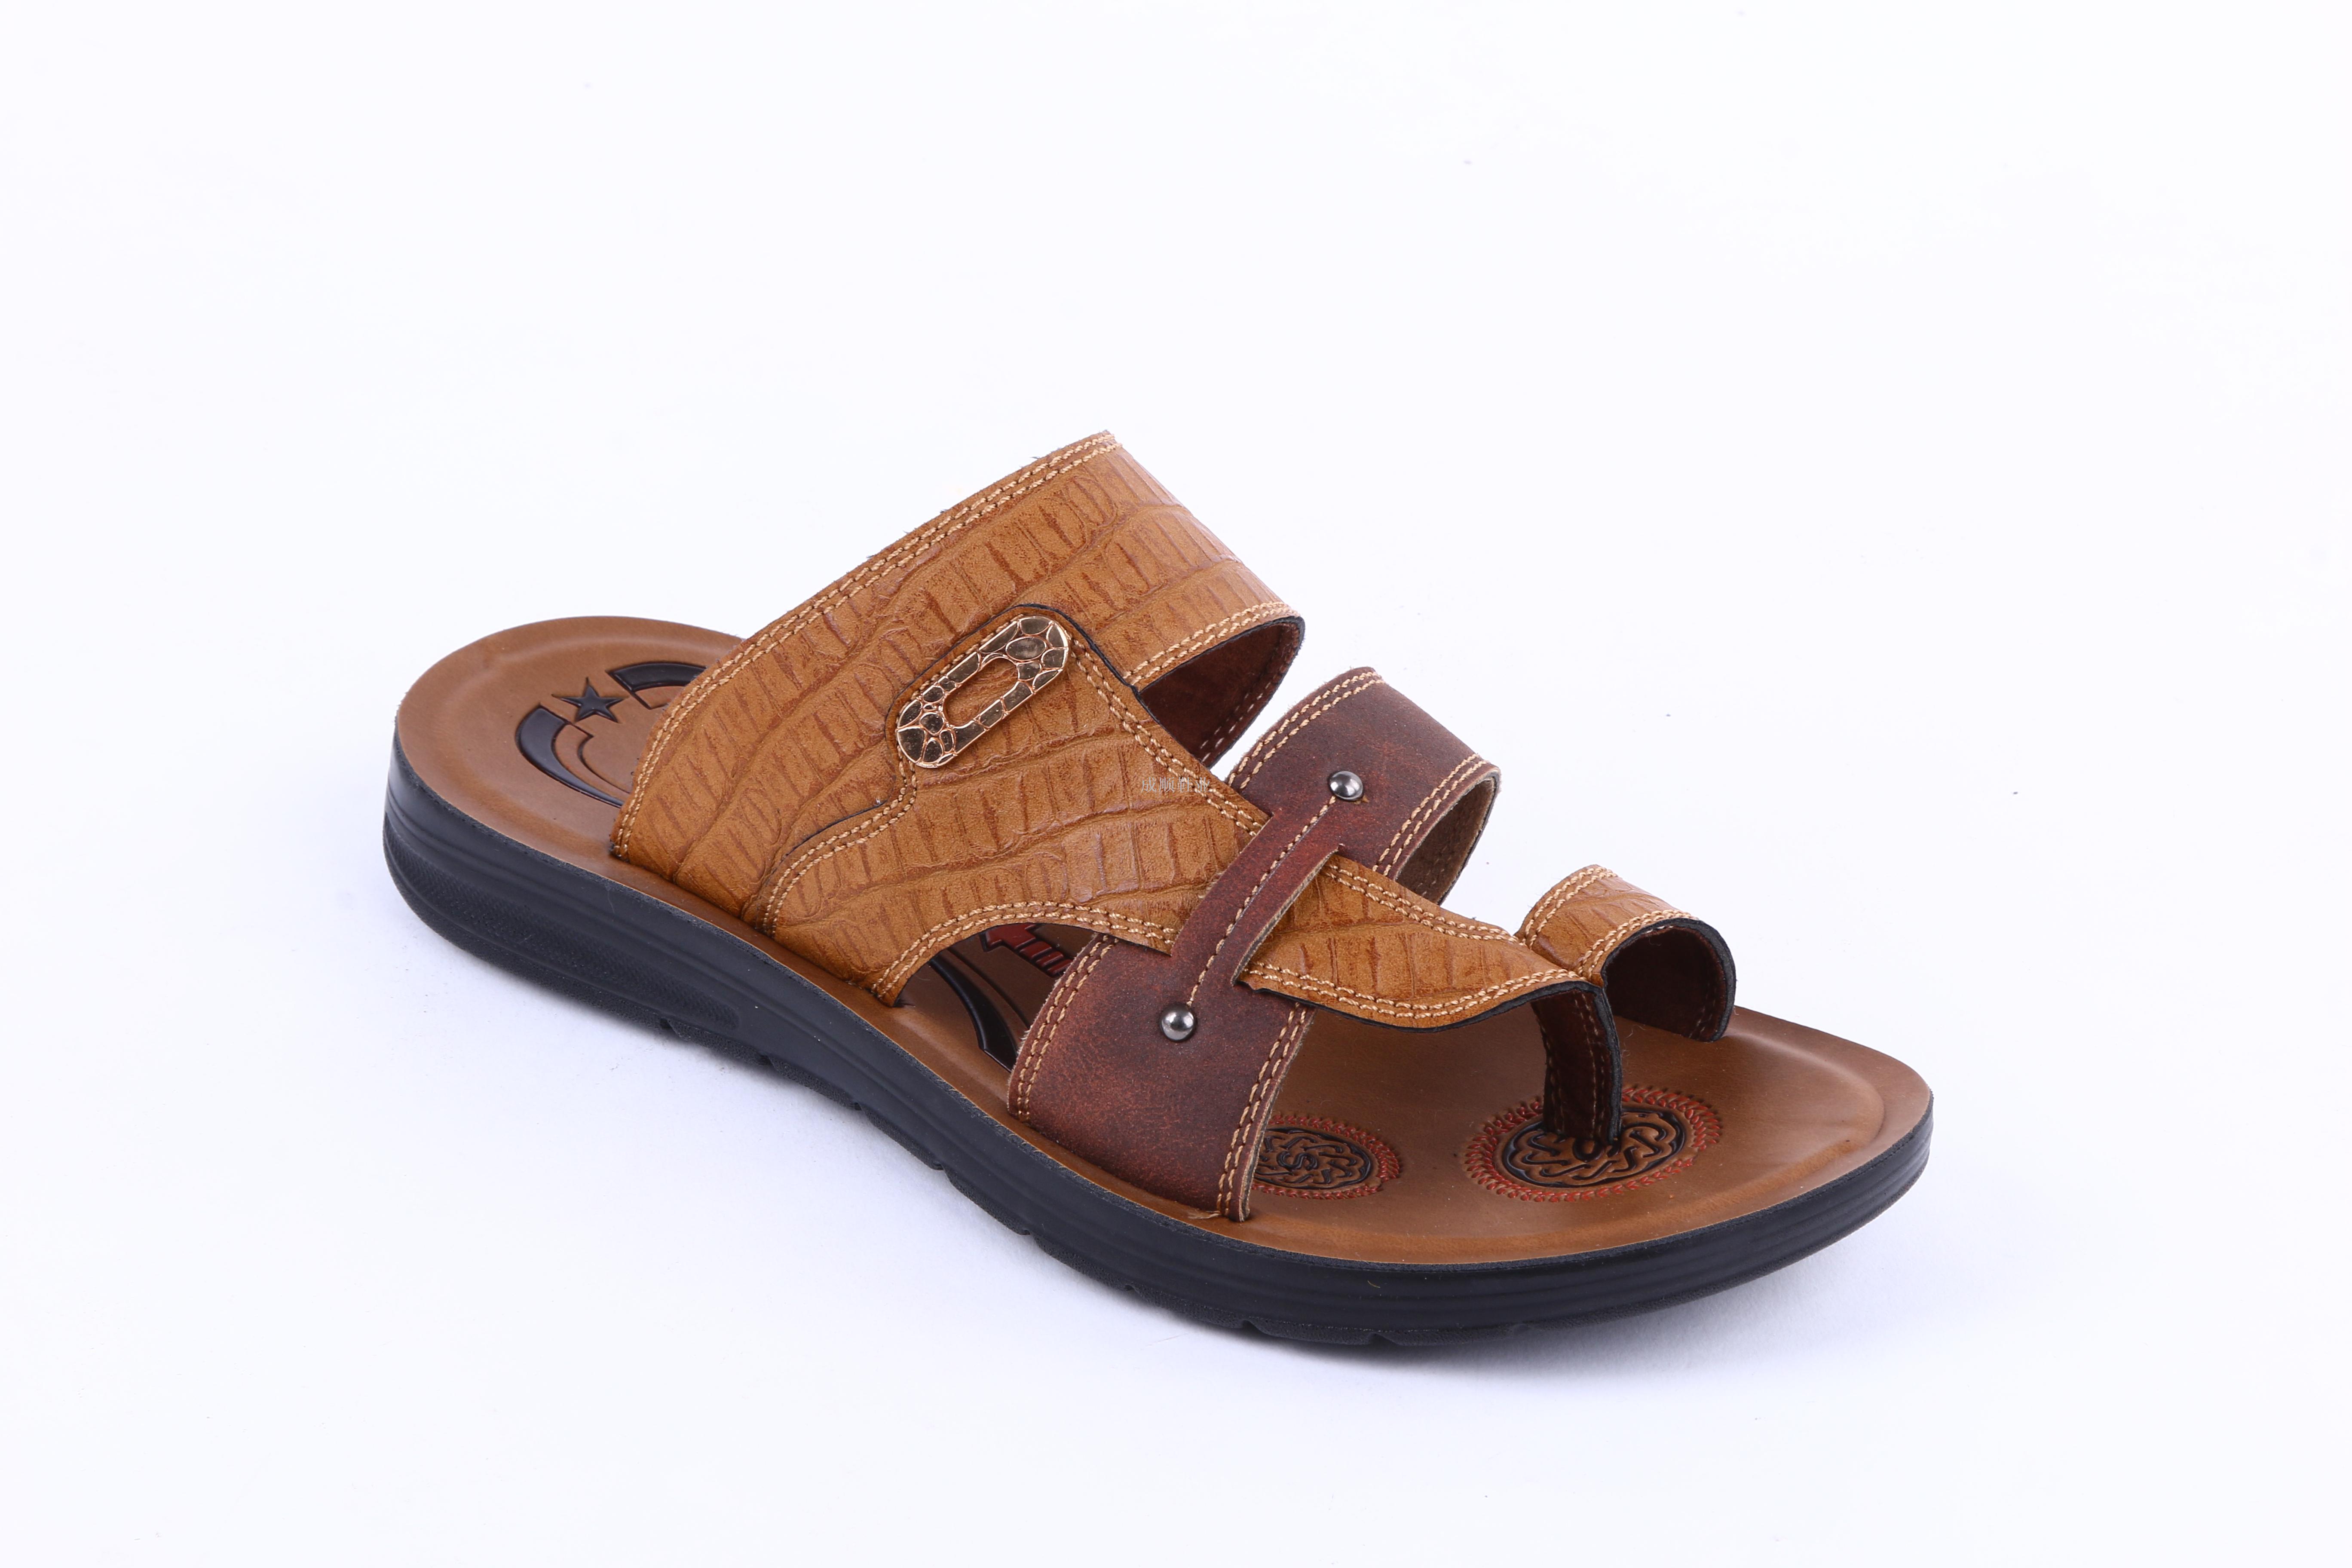 Supply New summer 2018 men's sandals daily sandal sandals cool slippers ...